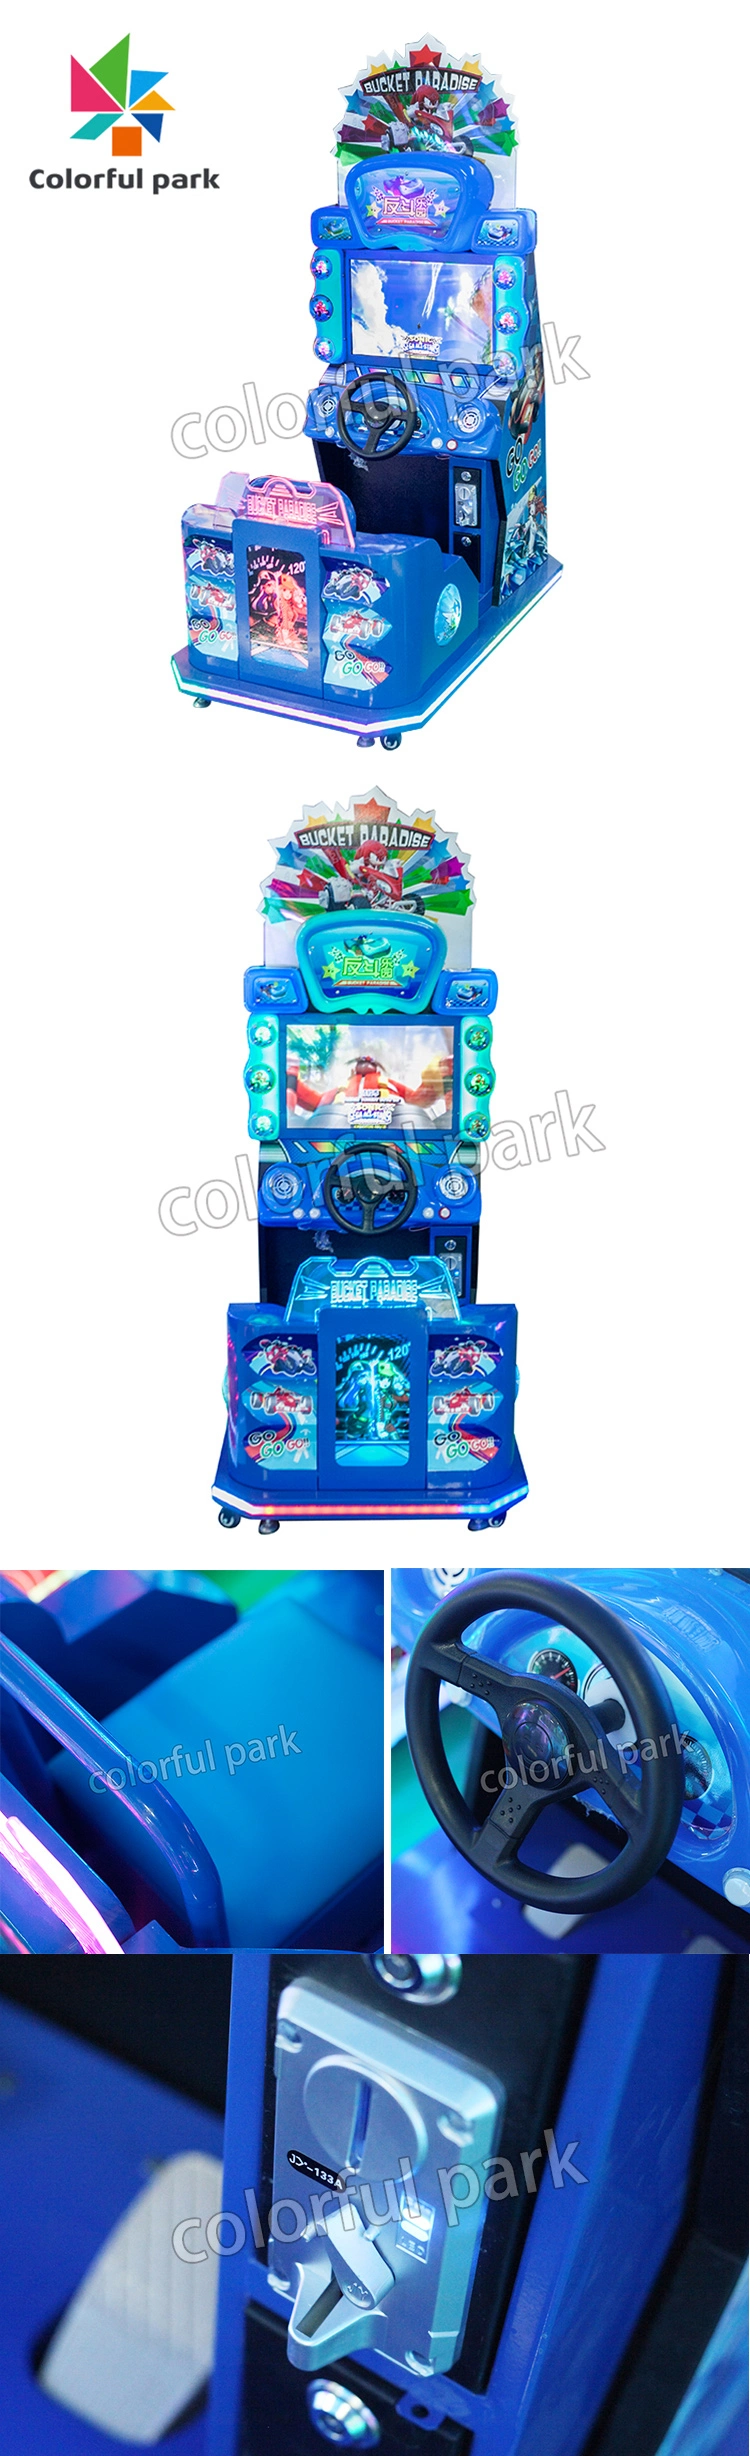 Colorful Park Fighter Paradise Racing Game Machine Coin Operated Car Racing Game Machine Kiddie Ride Game Machine